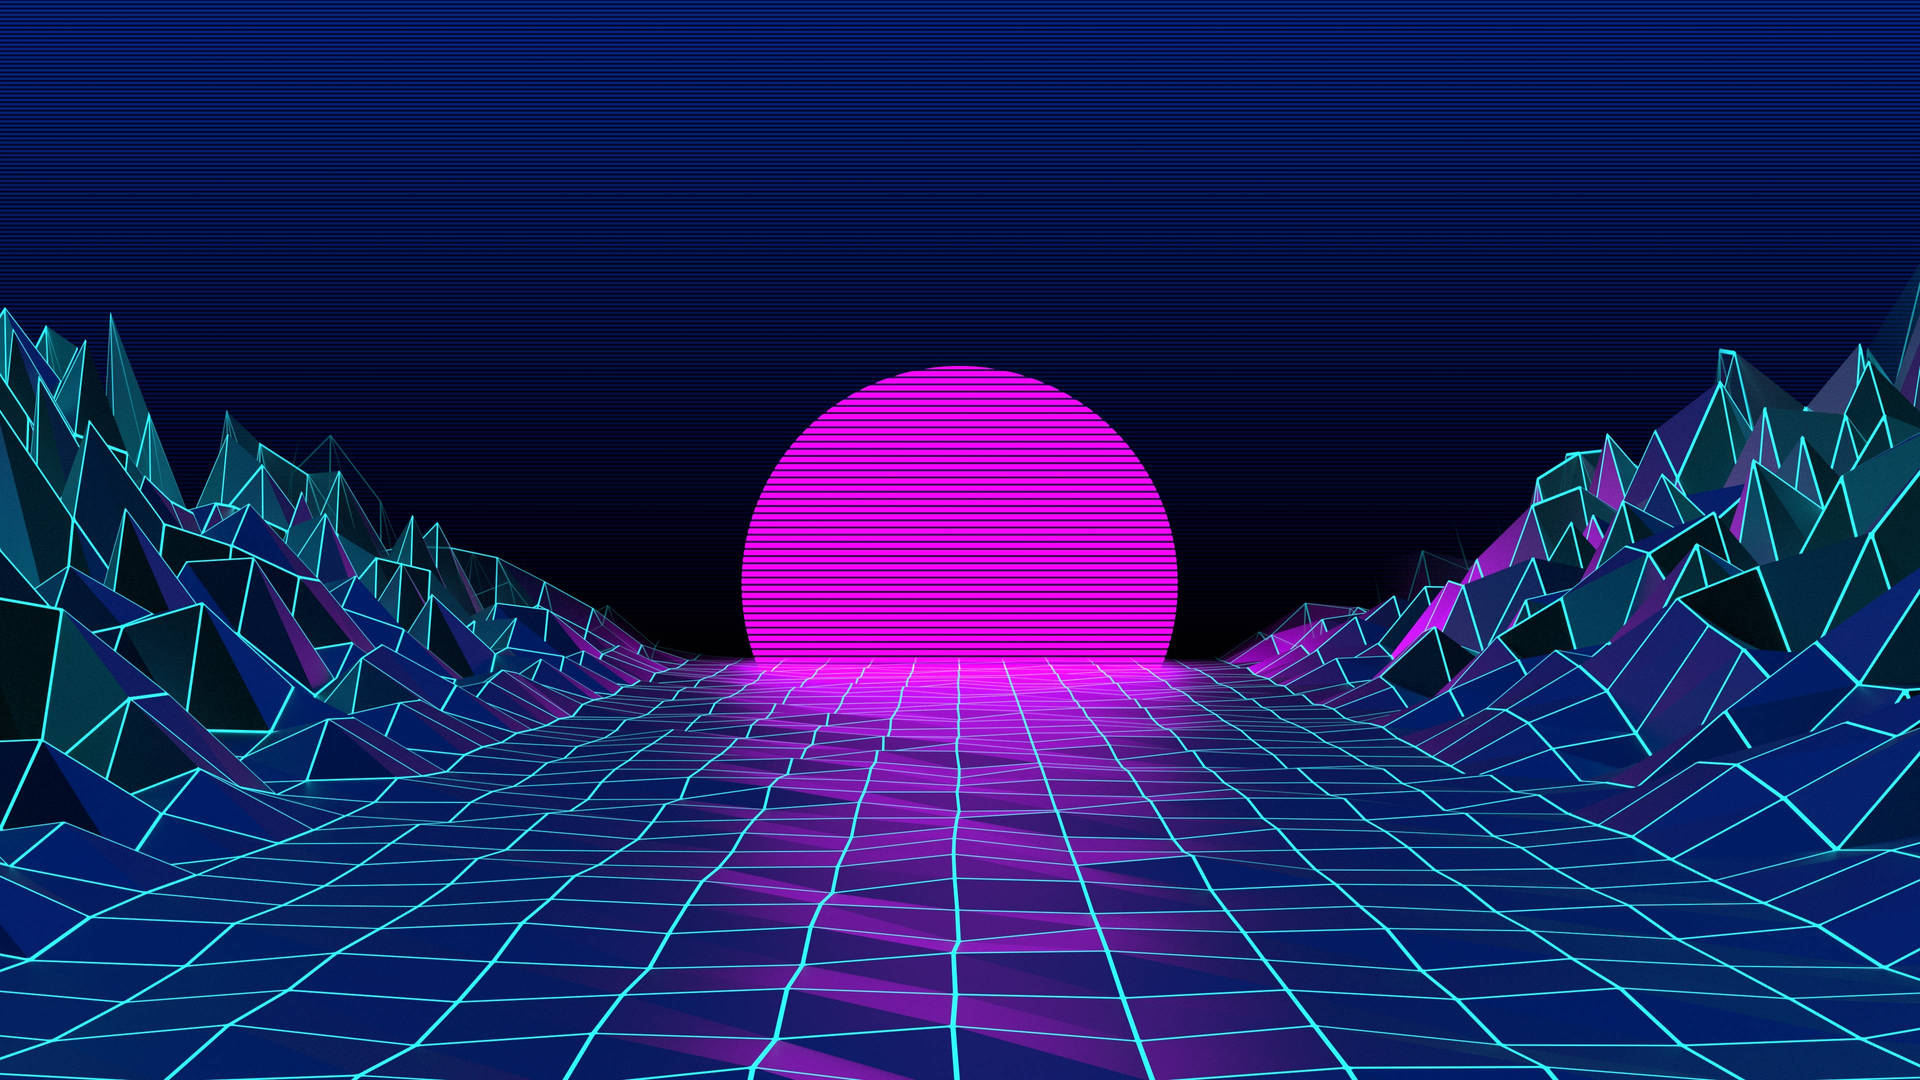 80s Synthwave Aesthetic Cover